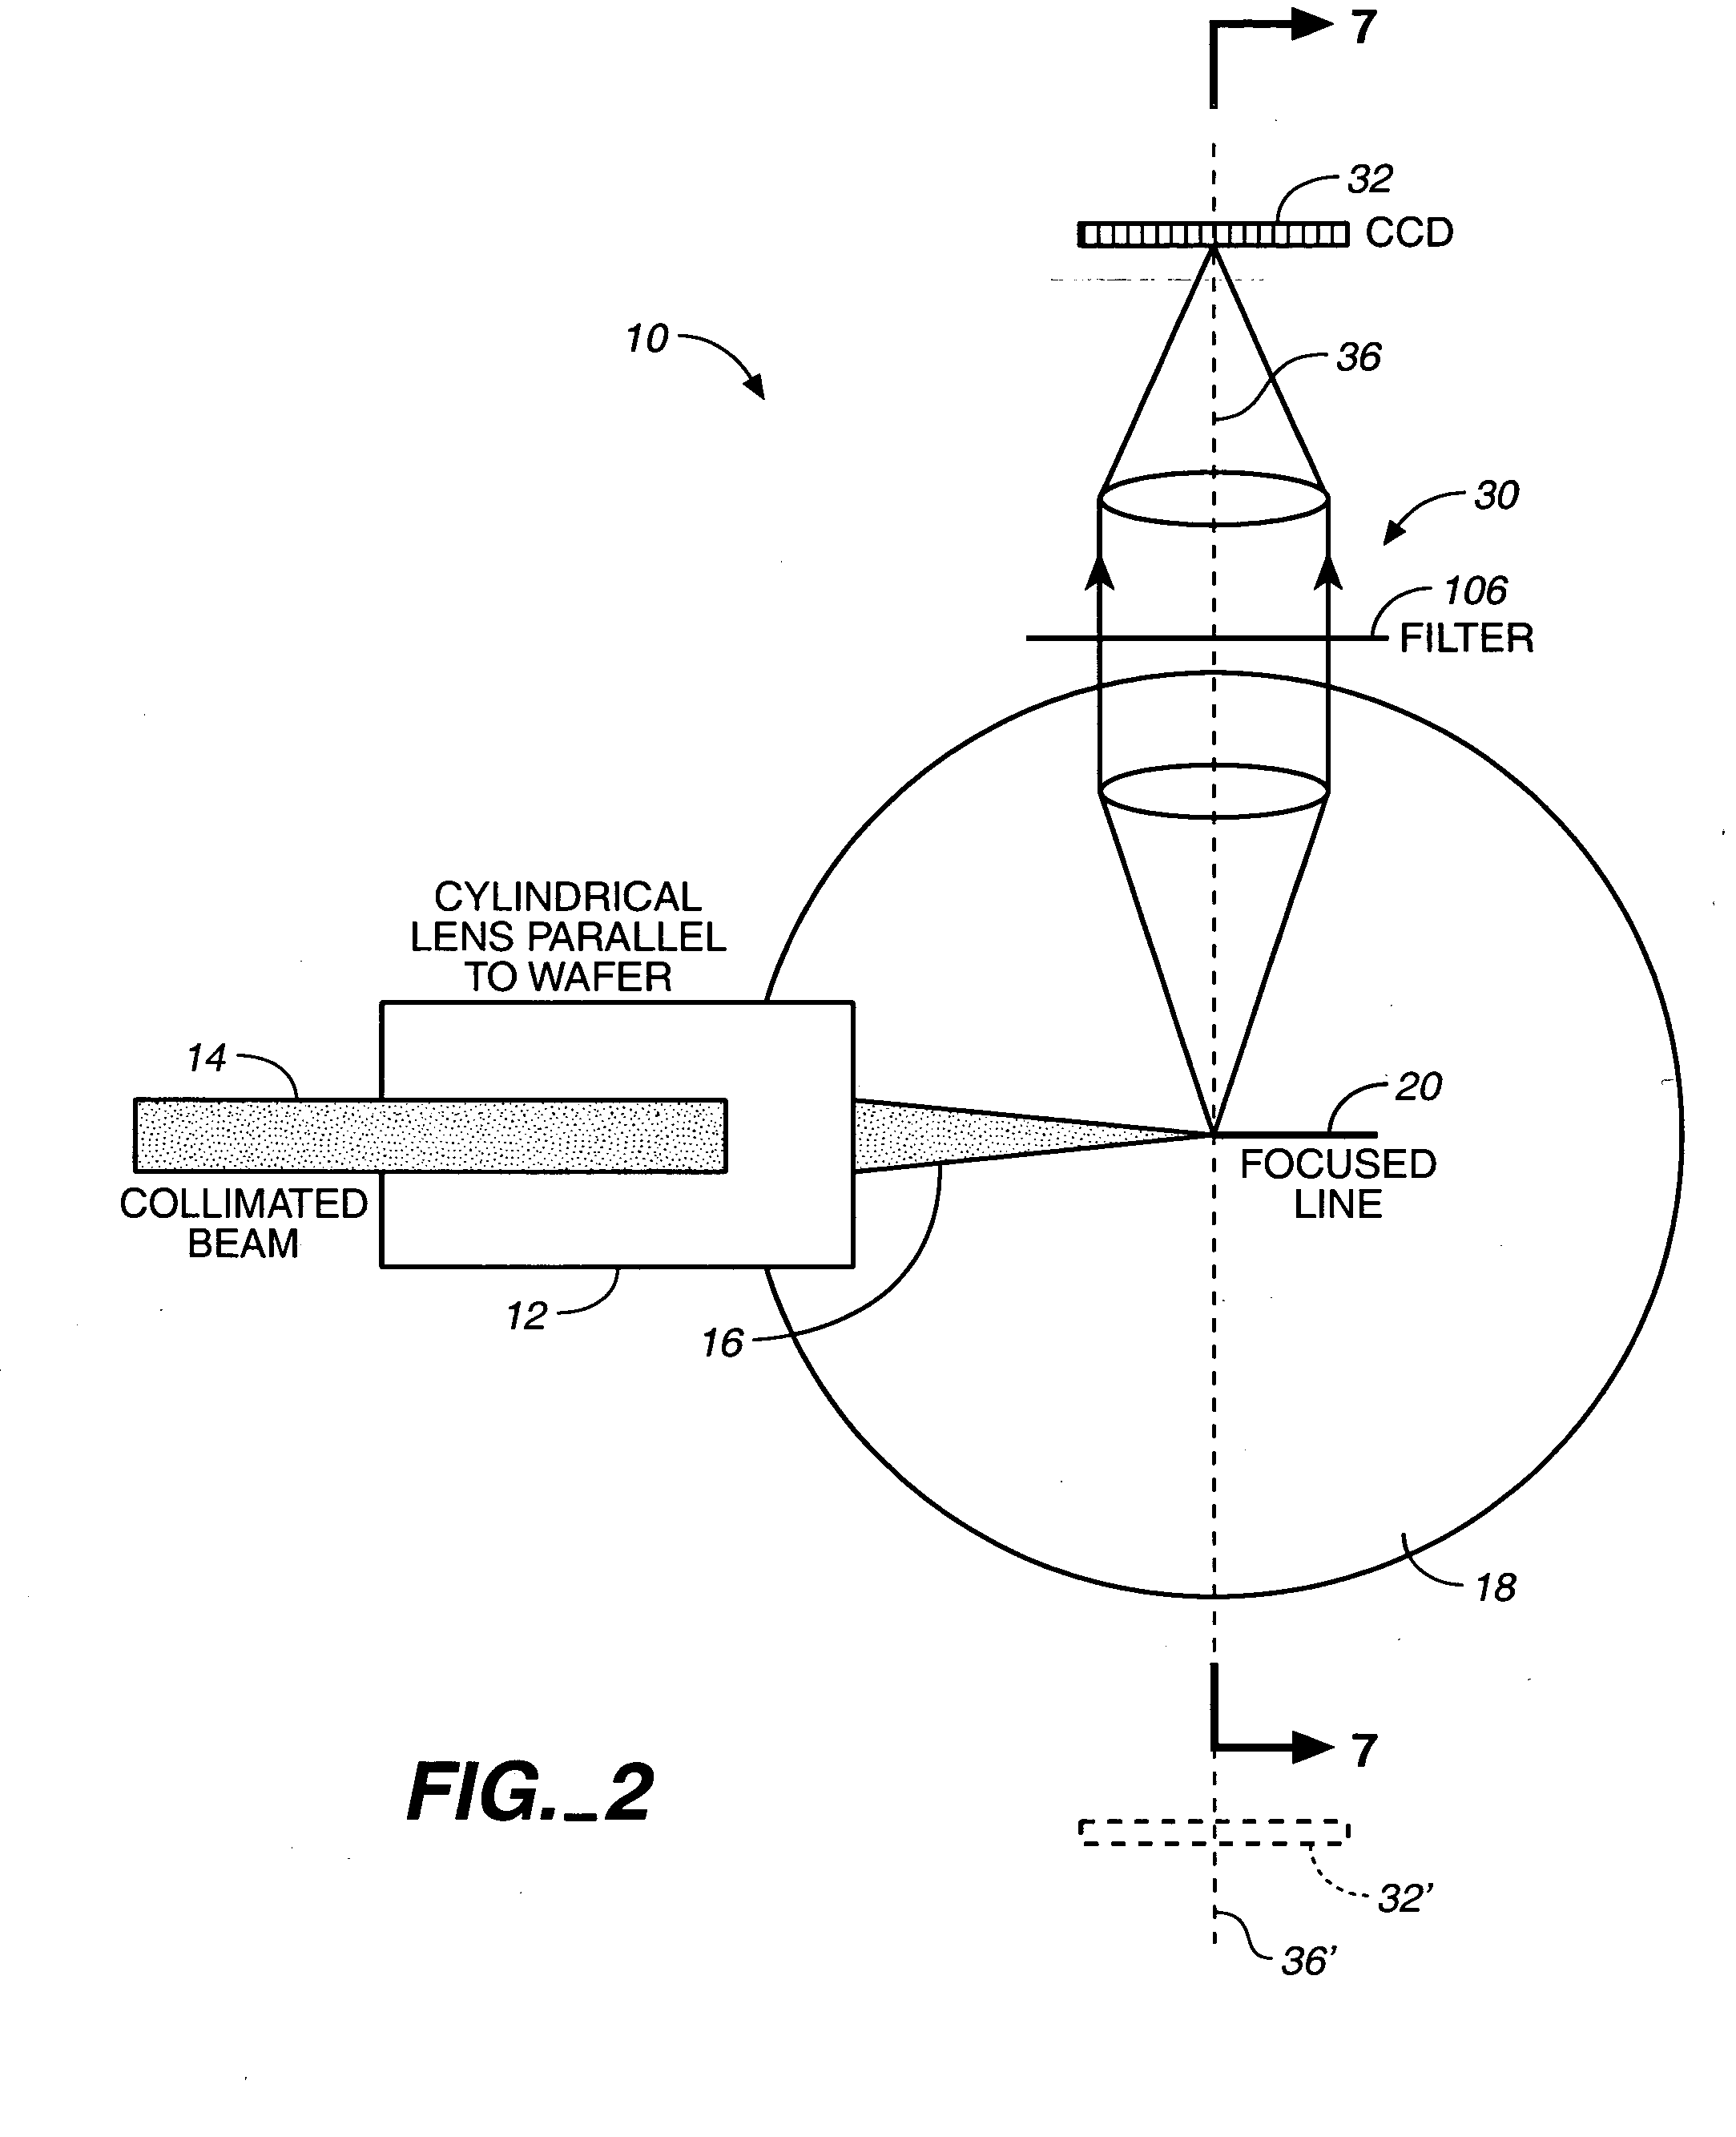 Optical system for detecting anomalies and/or features of surfaces